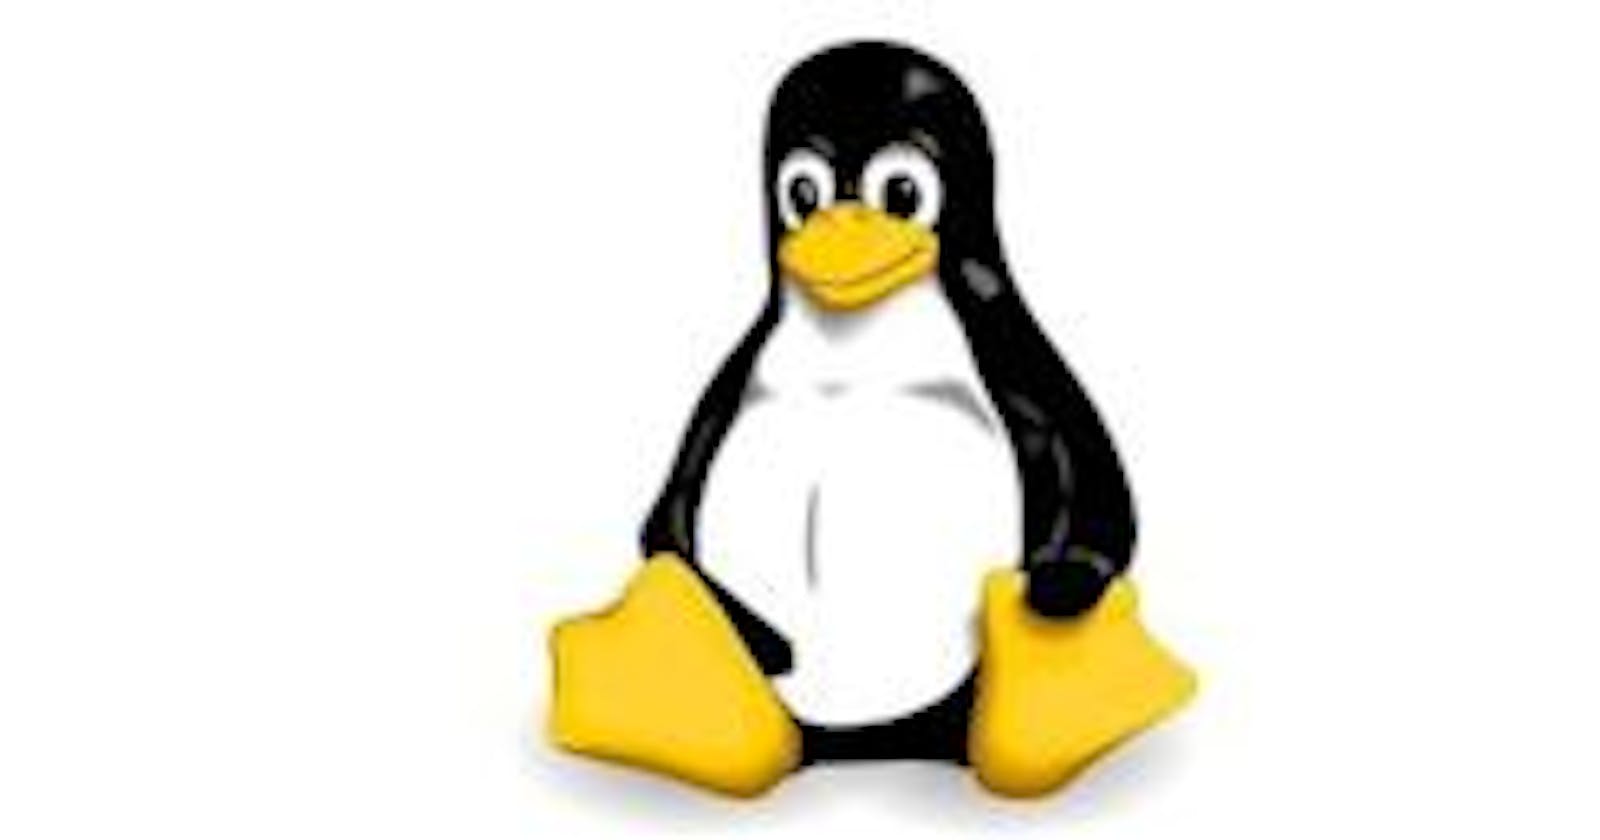 Getting started with LINUX